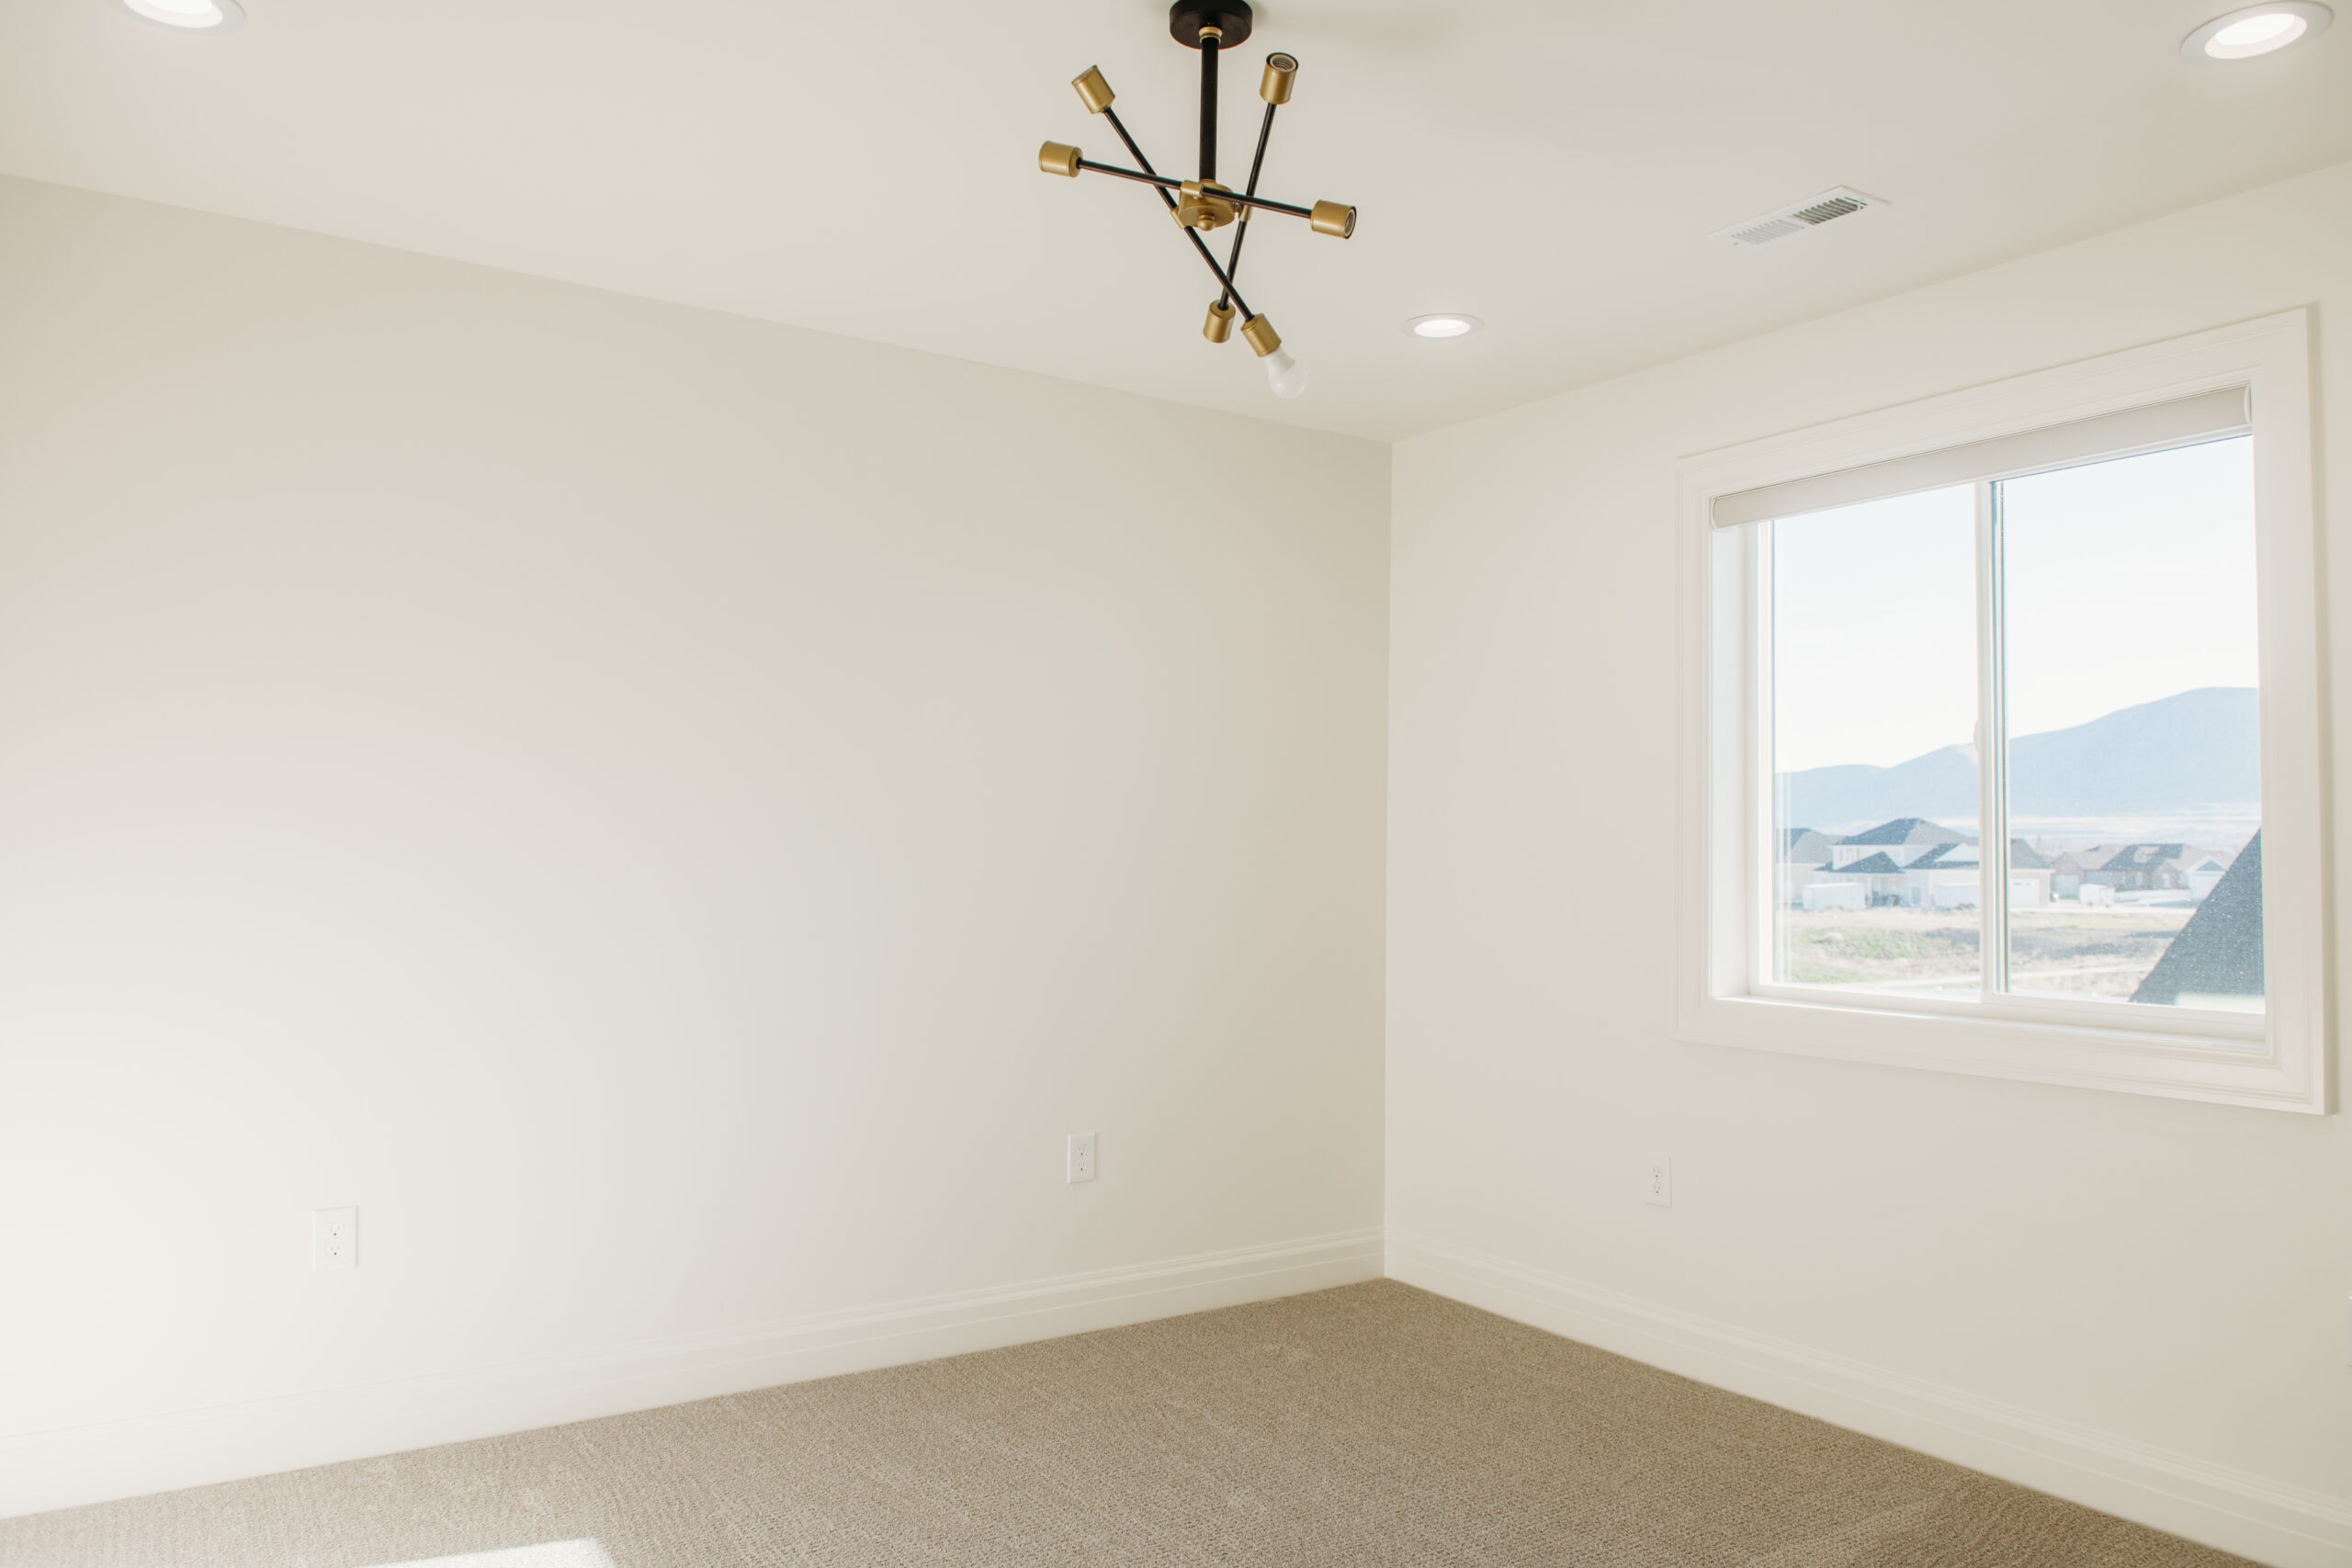 tremonton-home-finished25